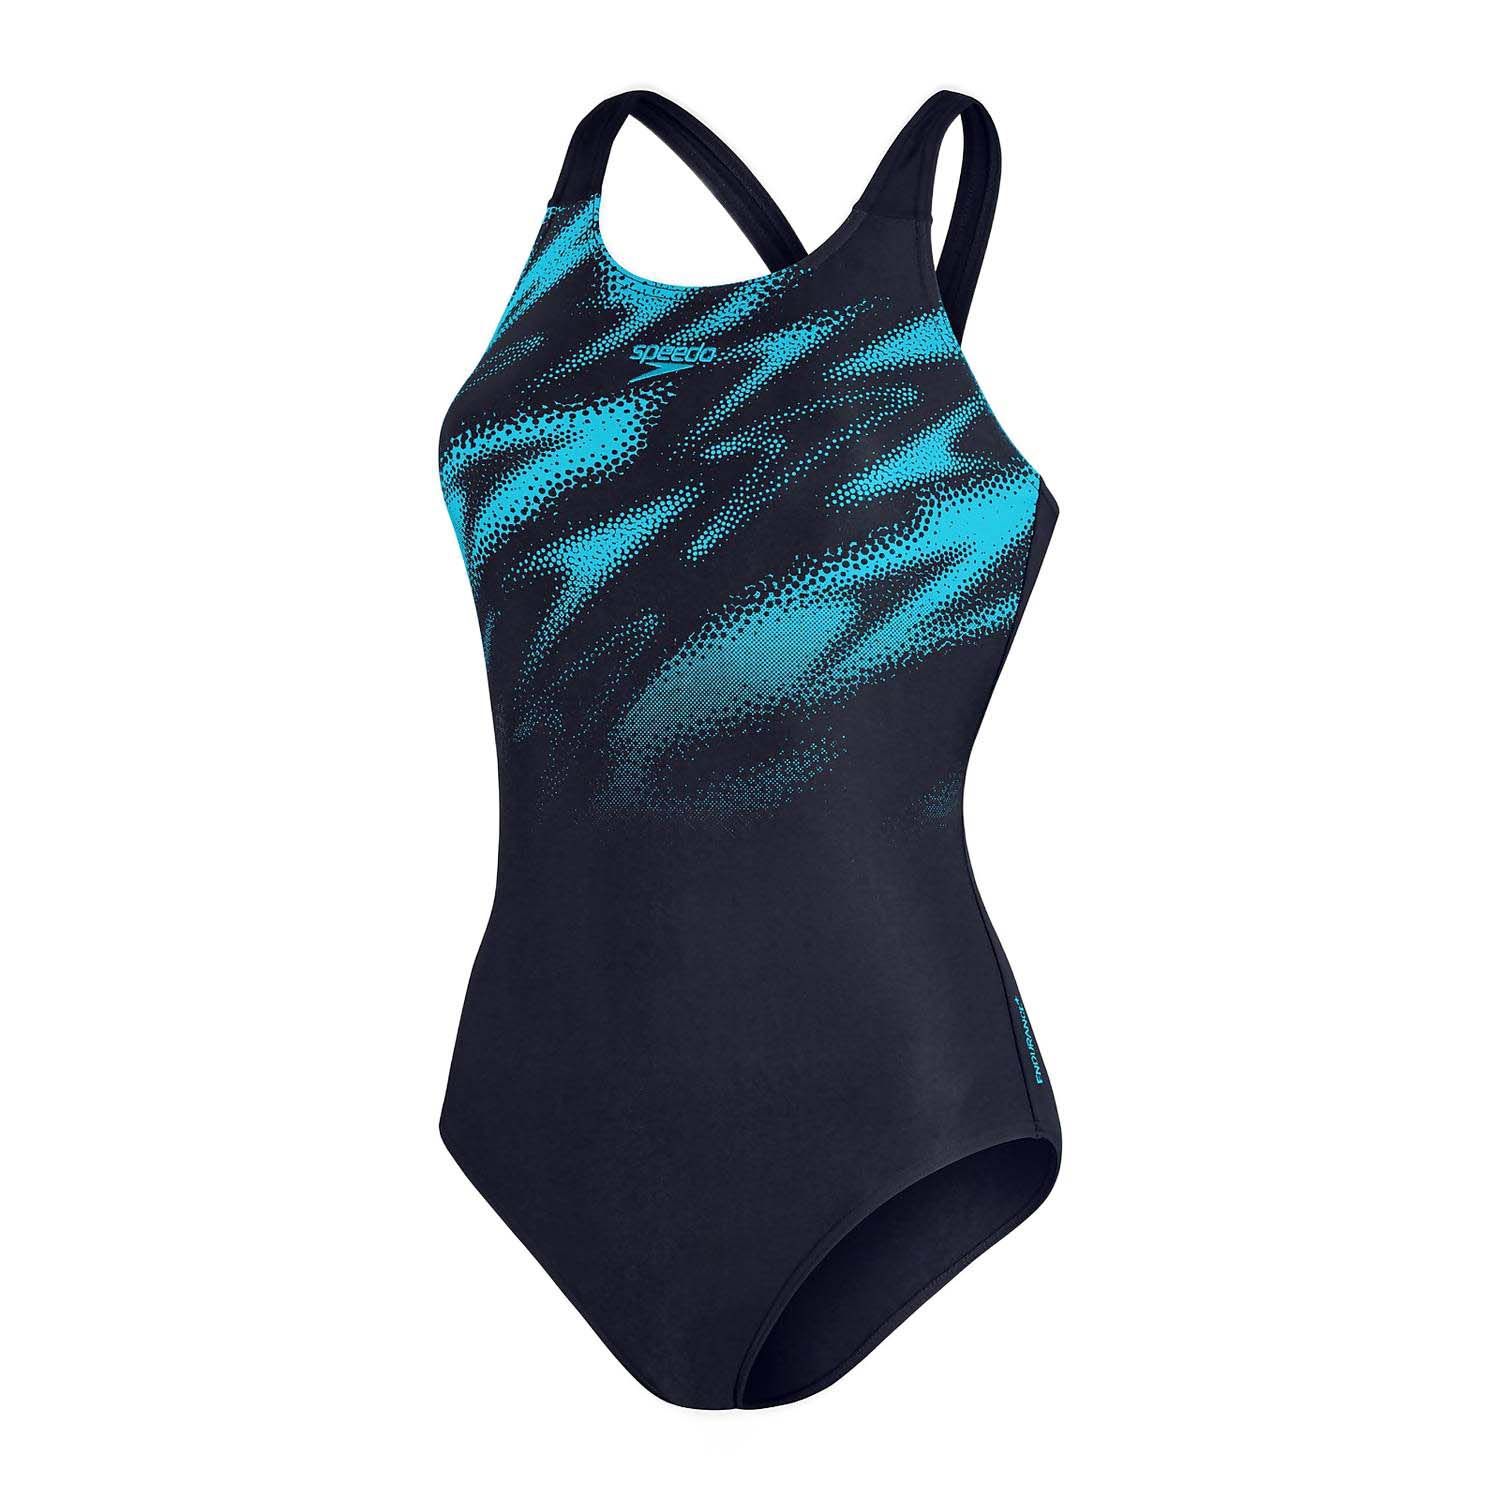 Womens HyperBoom Placement Muscleback Swimsuit